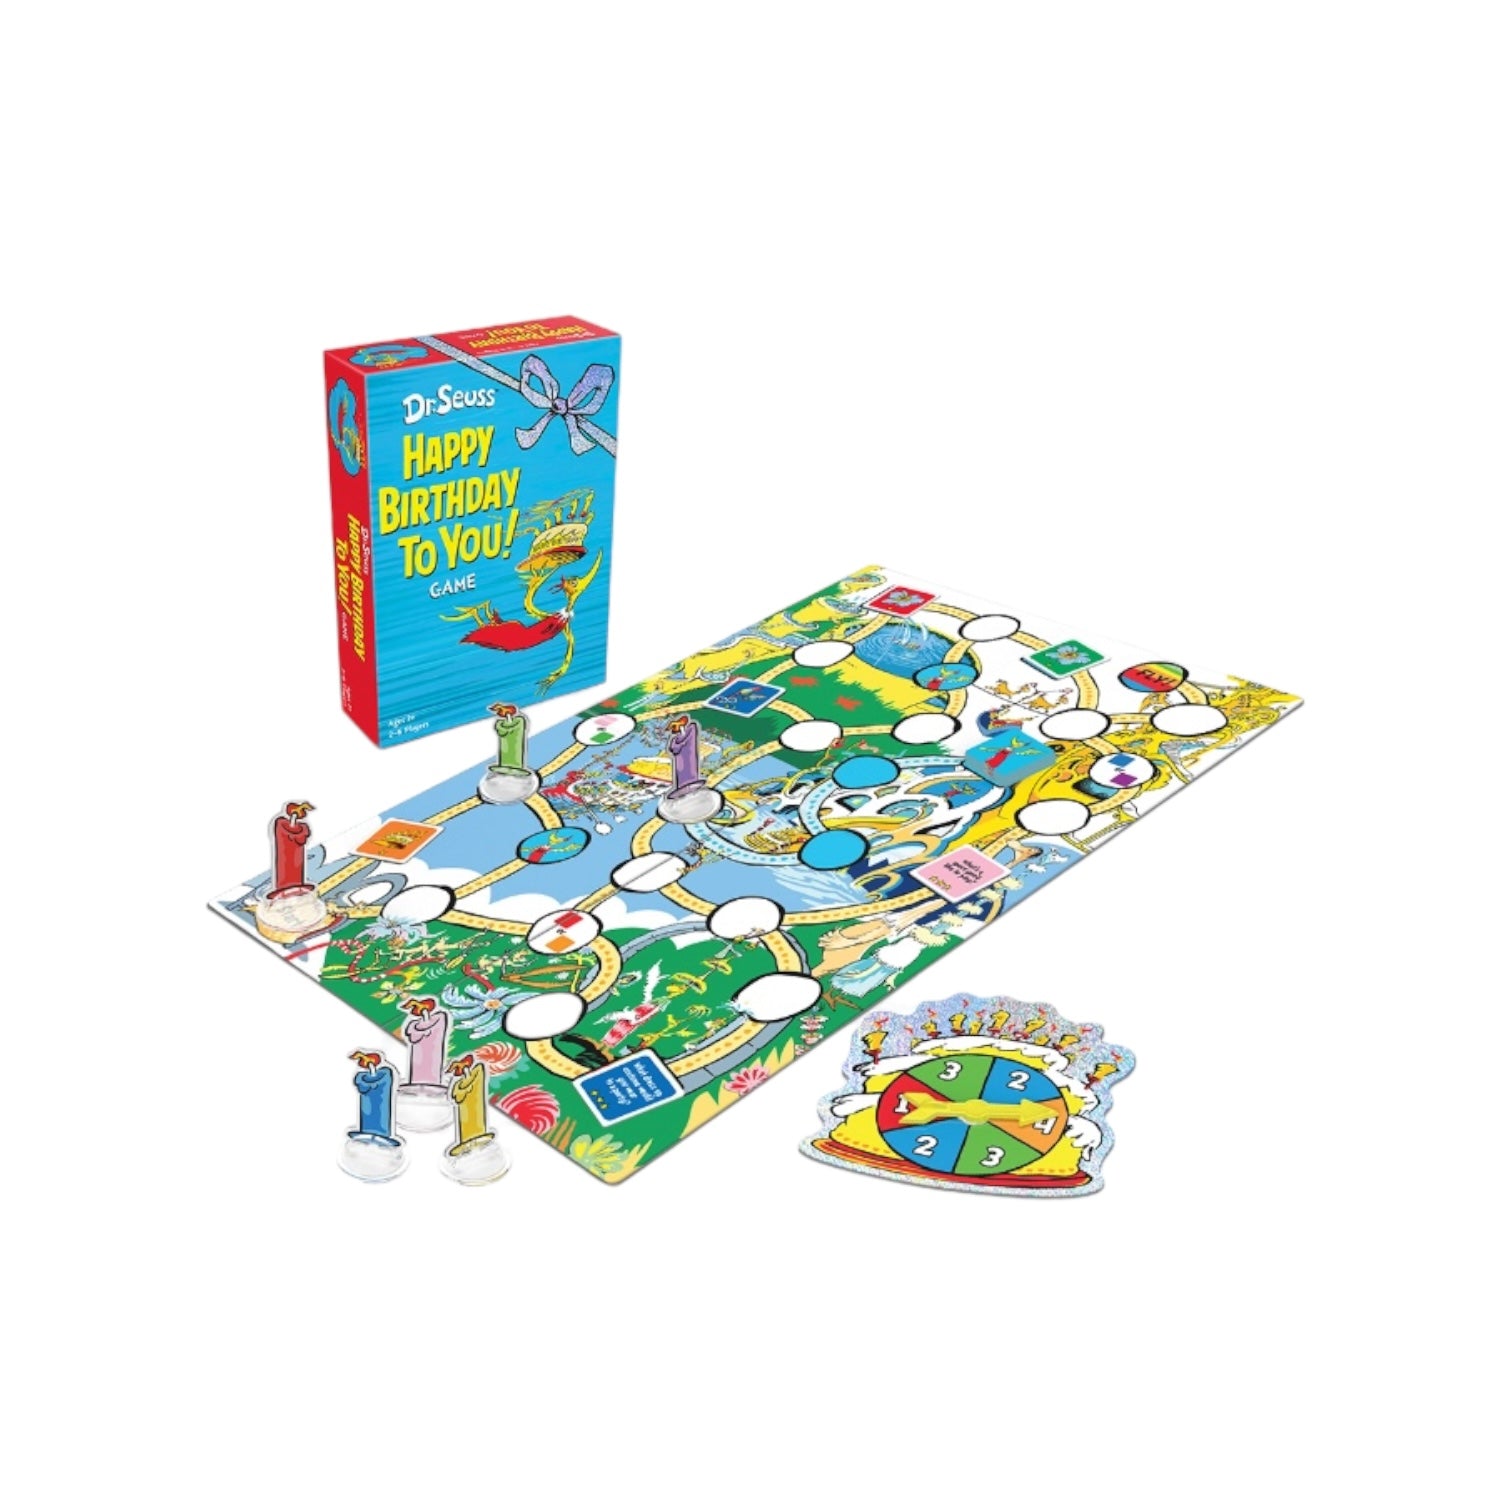 Happy Birthday to you Funko board game - Dr Suess